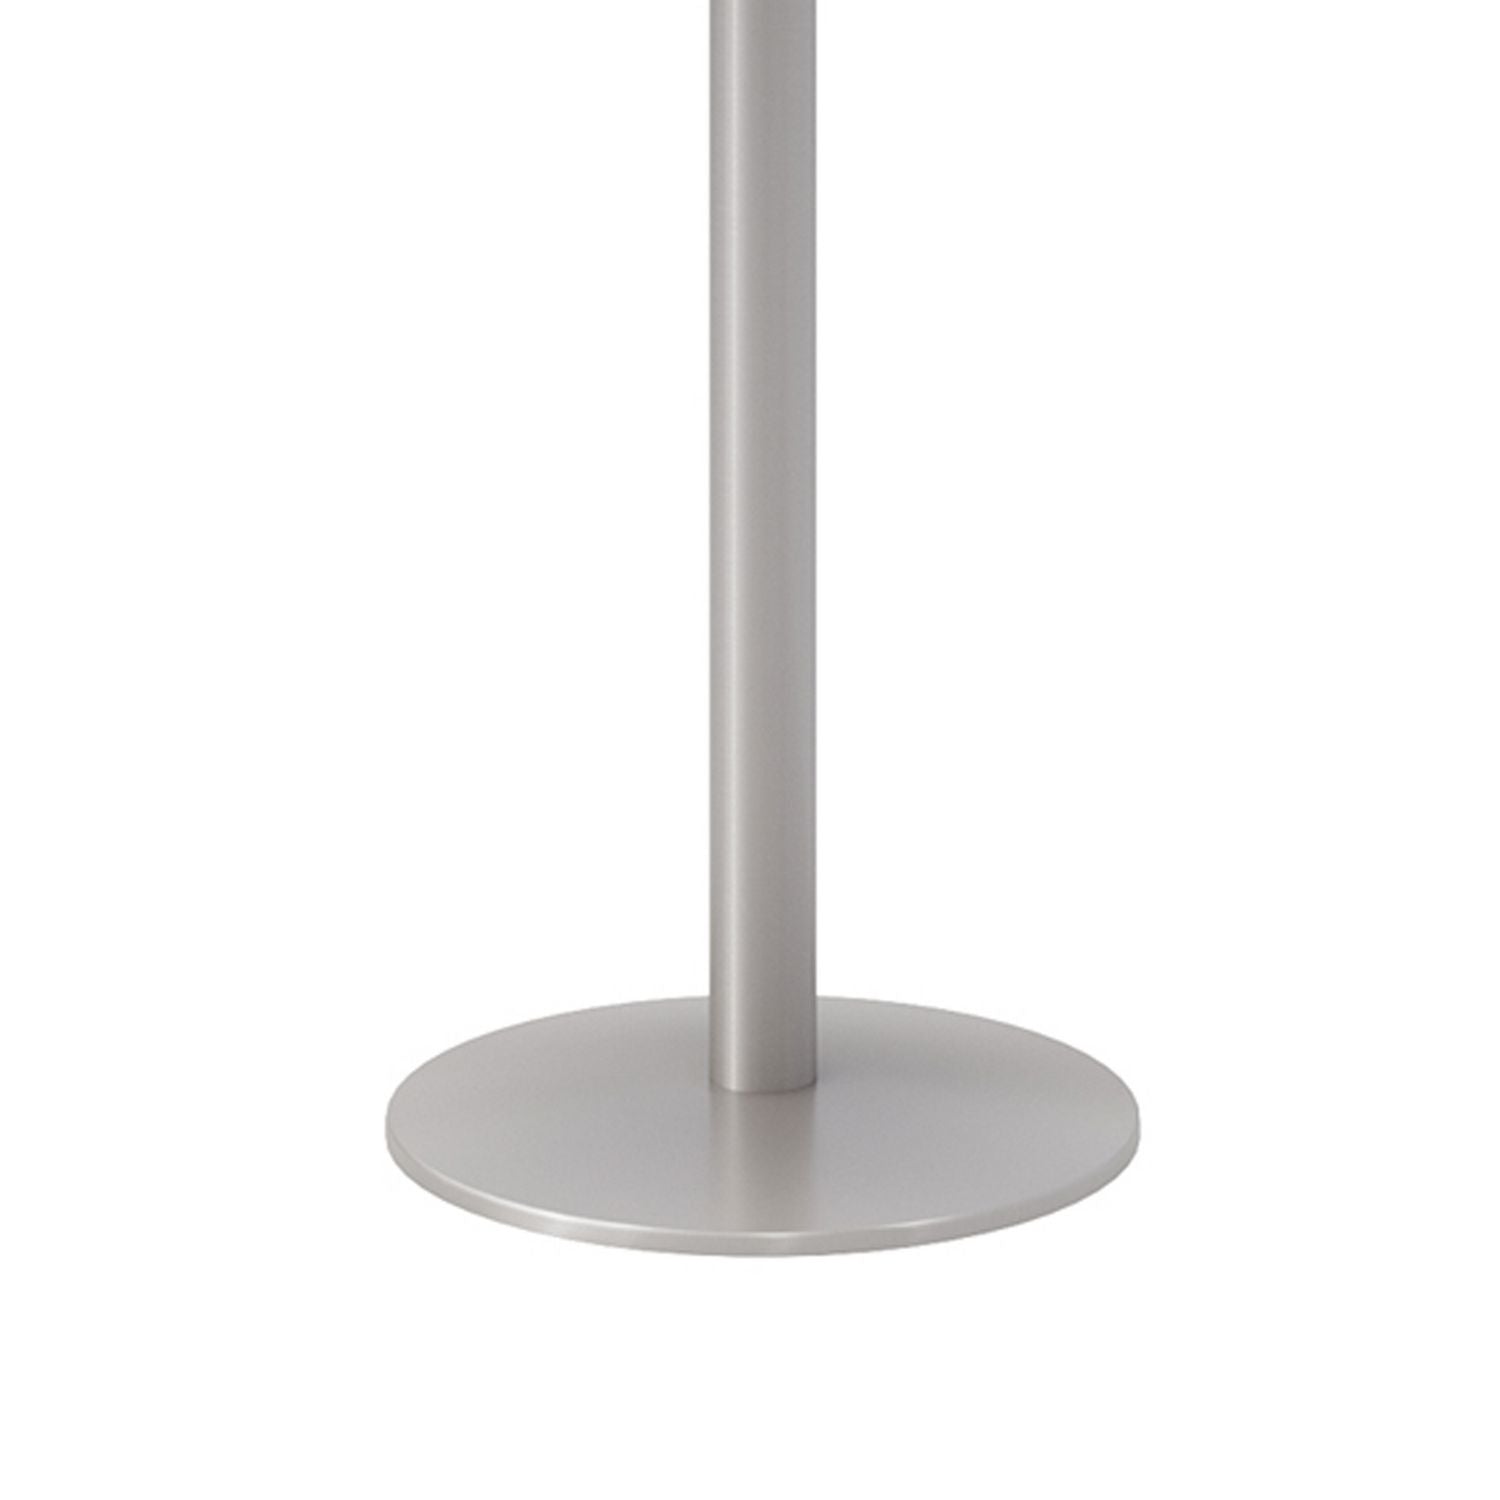 pedestal-bistro-table-with-four-coral-kool-series-barstools-round-36-dia-x-41h-designer-white-ships-in-4-6-business-days_kfi811774037150 - 3